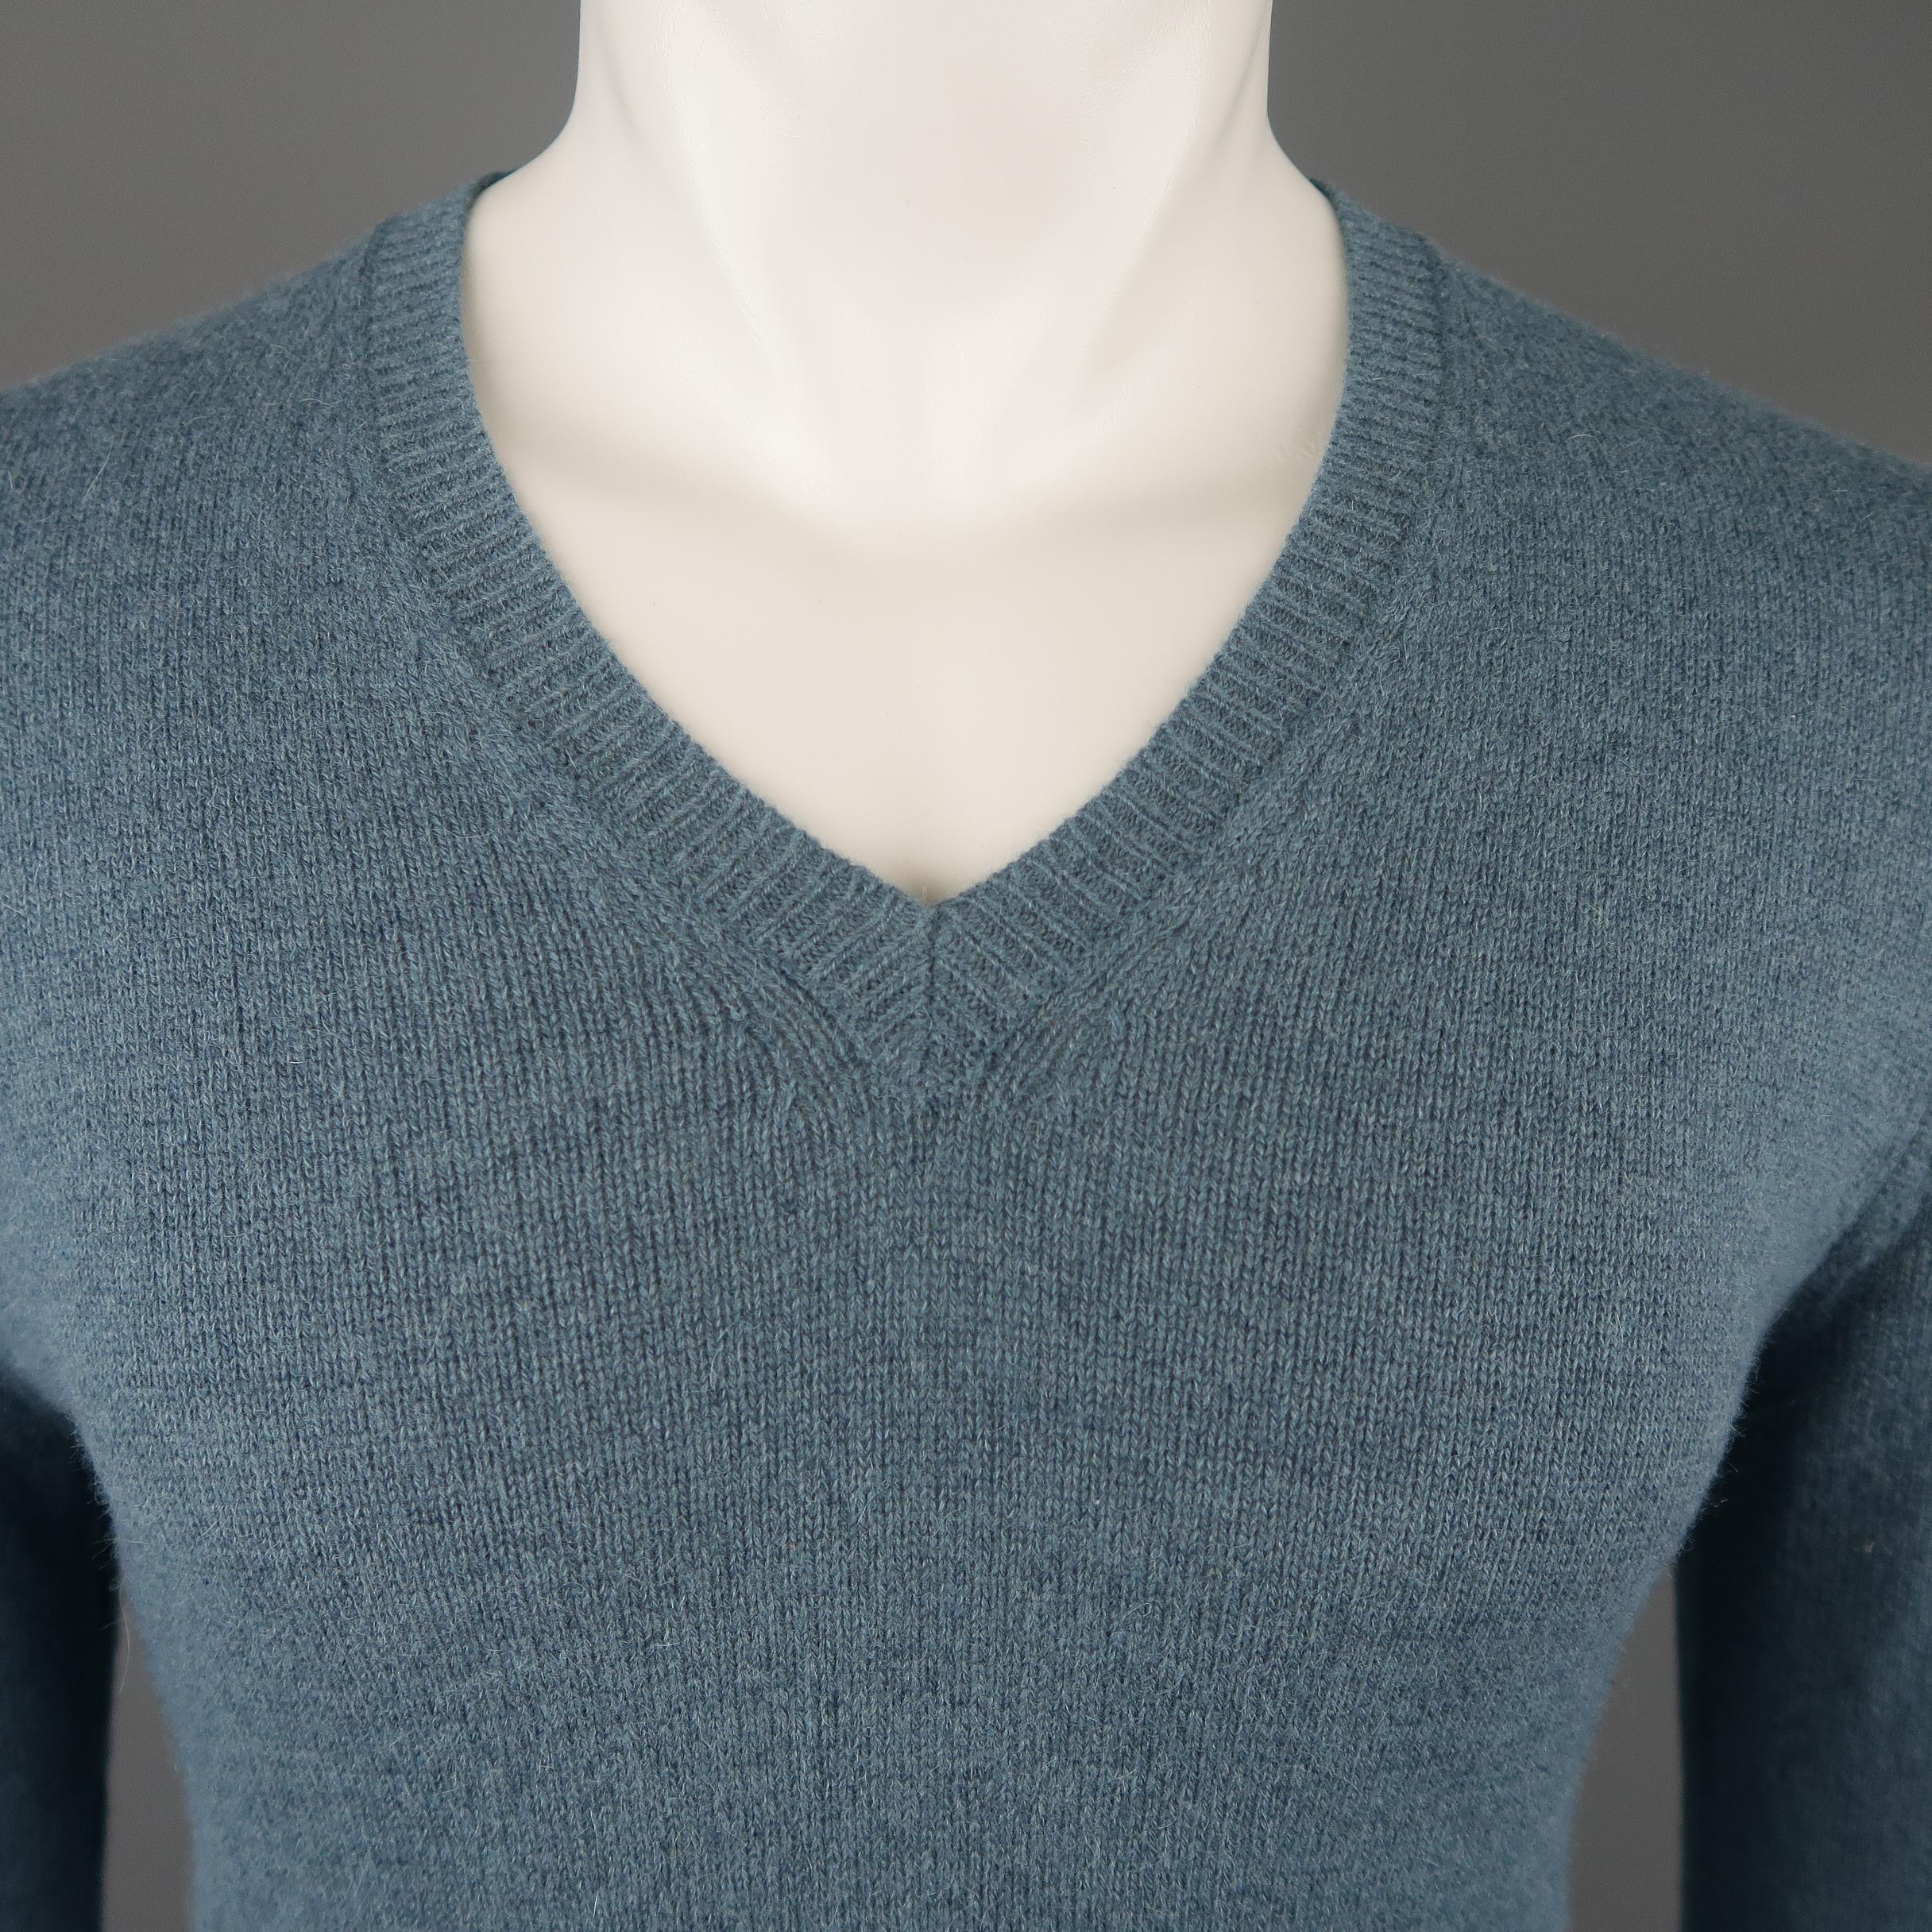 DRIES VAN NOTEN pullover sweater comes in a muted teal heathered alpaca blend knit with a v neck and ribbed waistband. Made in Belgium.
 
Excellent Pre-Owned Condition.
Marked: Small
 
Measurements:
 
Shoulder: 17 in.
Chest: 40 in.
Sleeve: 28